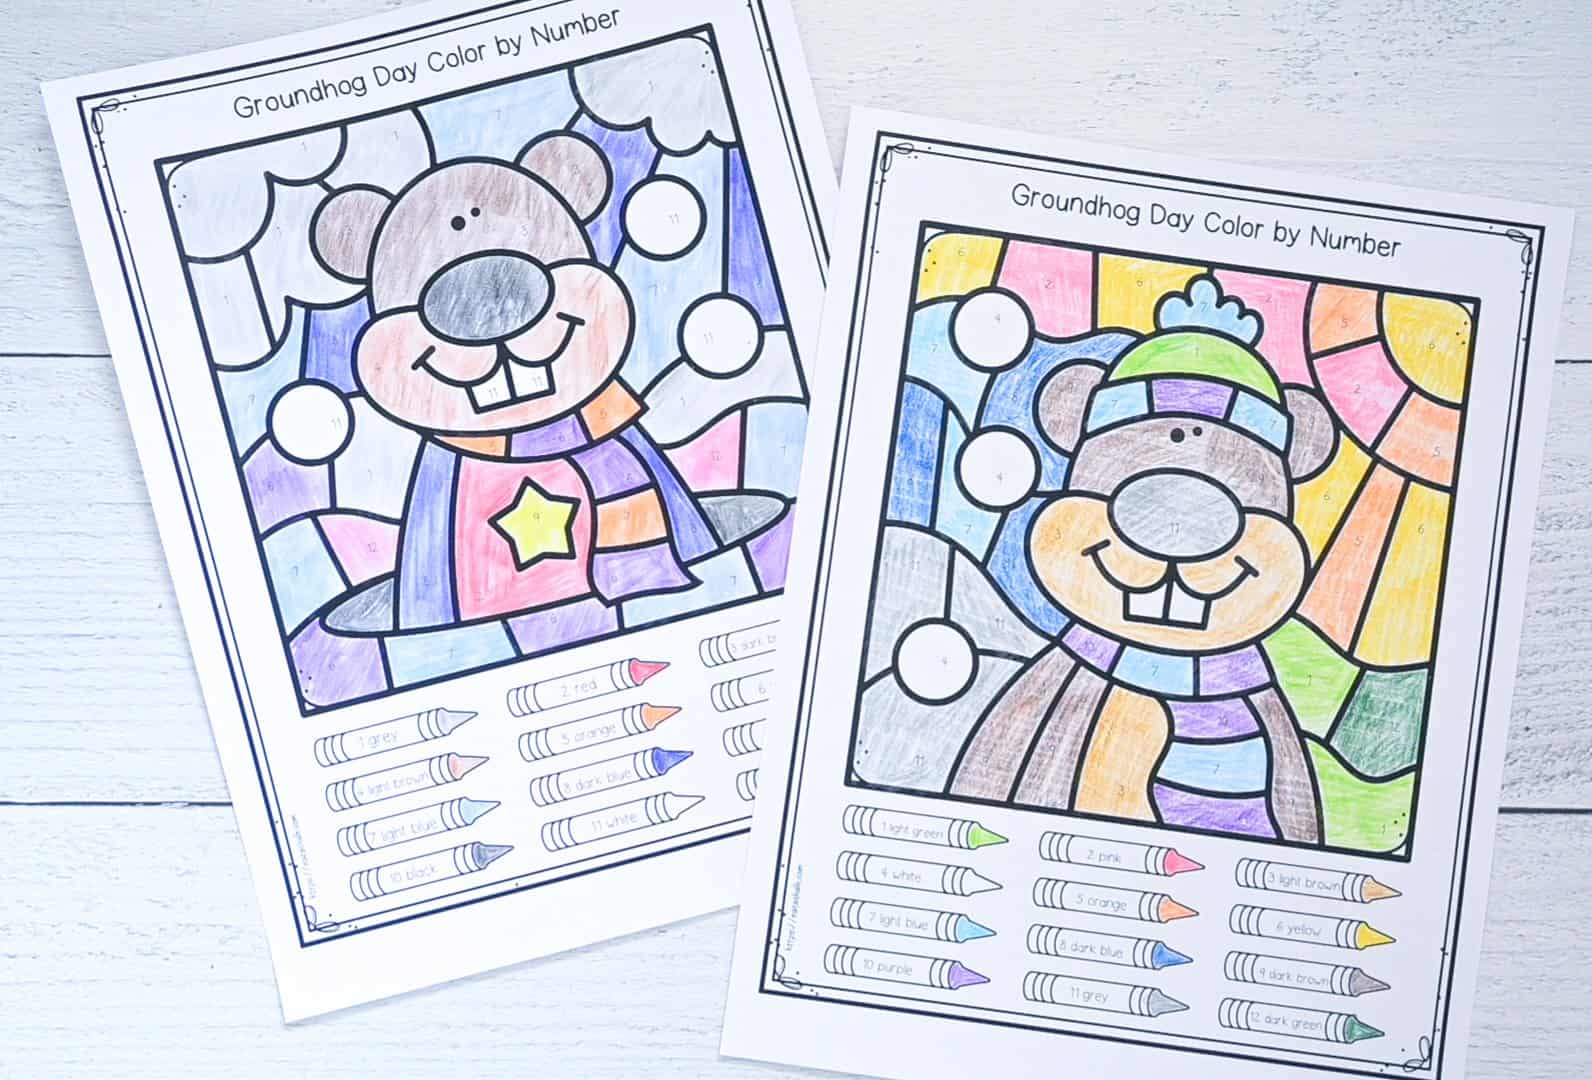 A photo of two completed Groundhog's Day color by number pages for kindergarten students 